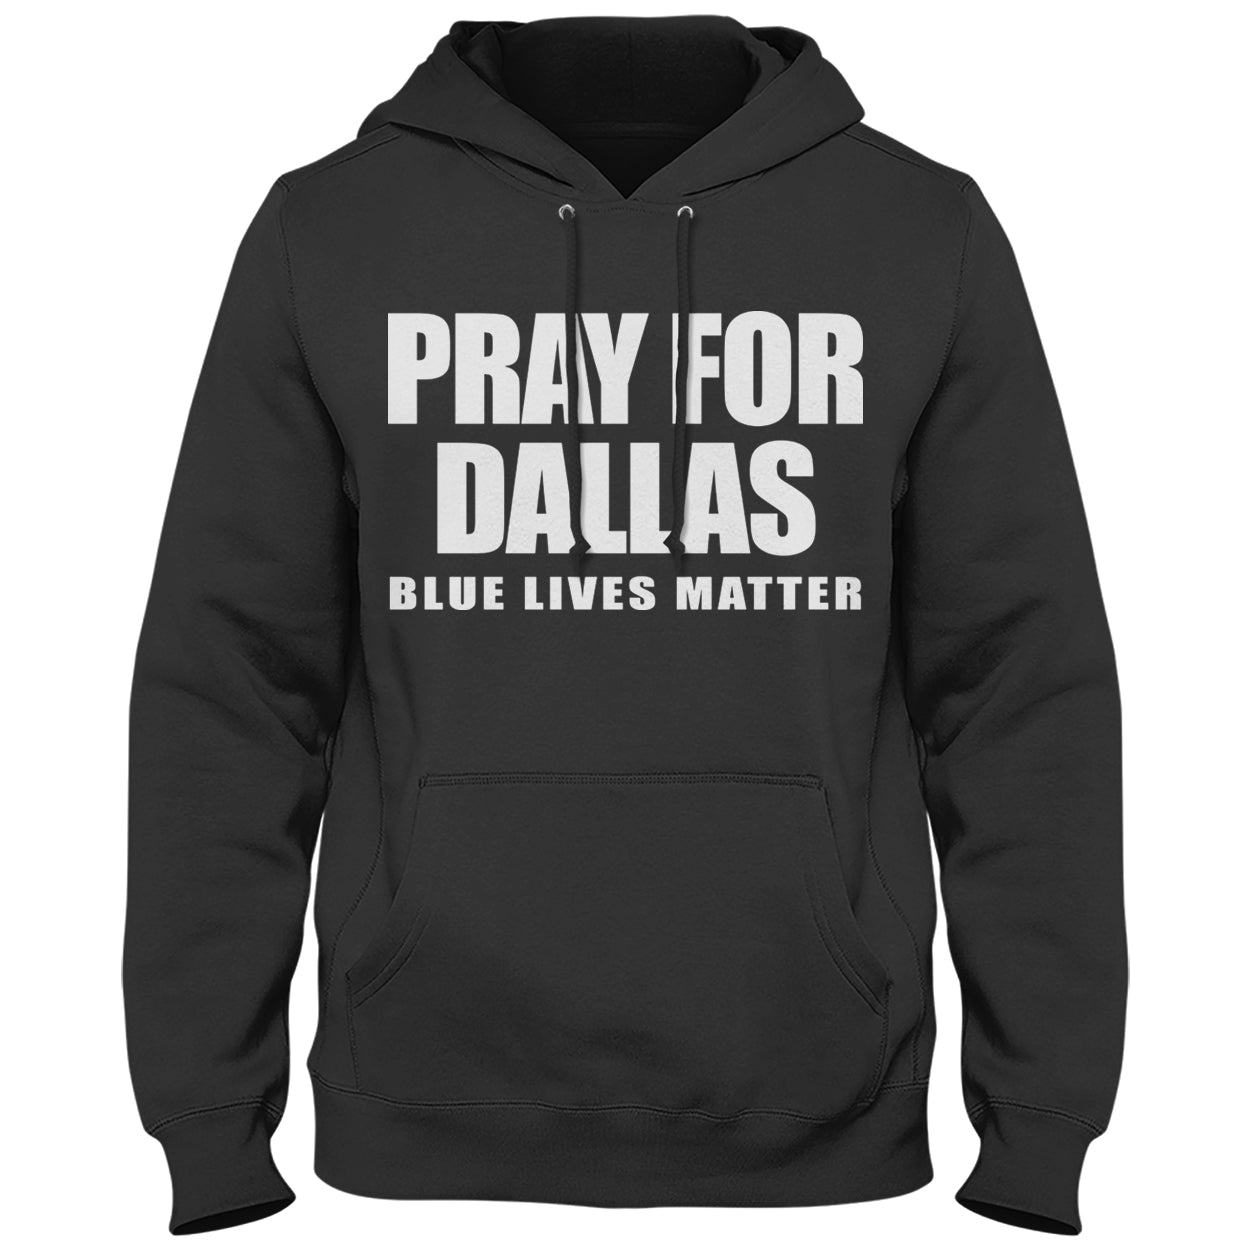 Pray For Dallas - Blue Lives Matter Adult Hoodie